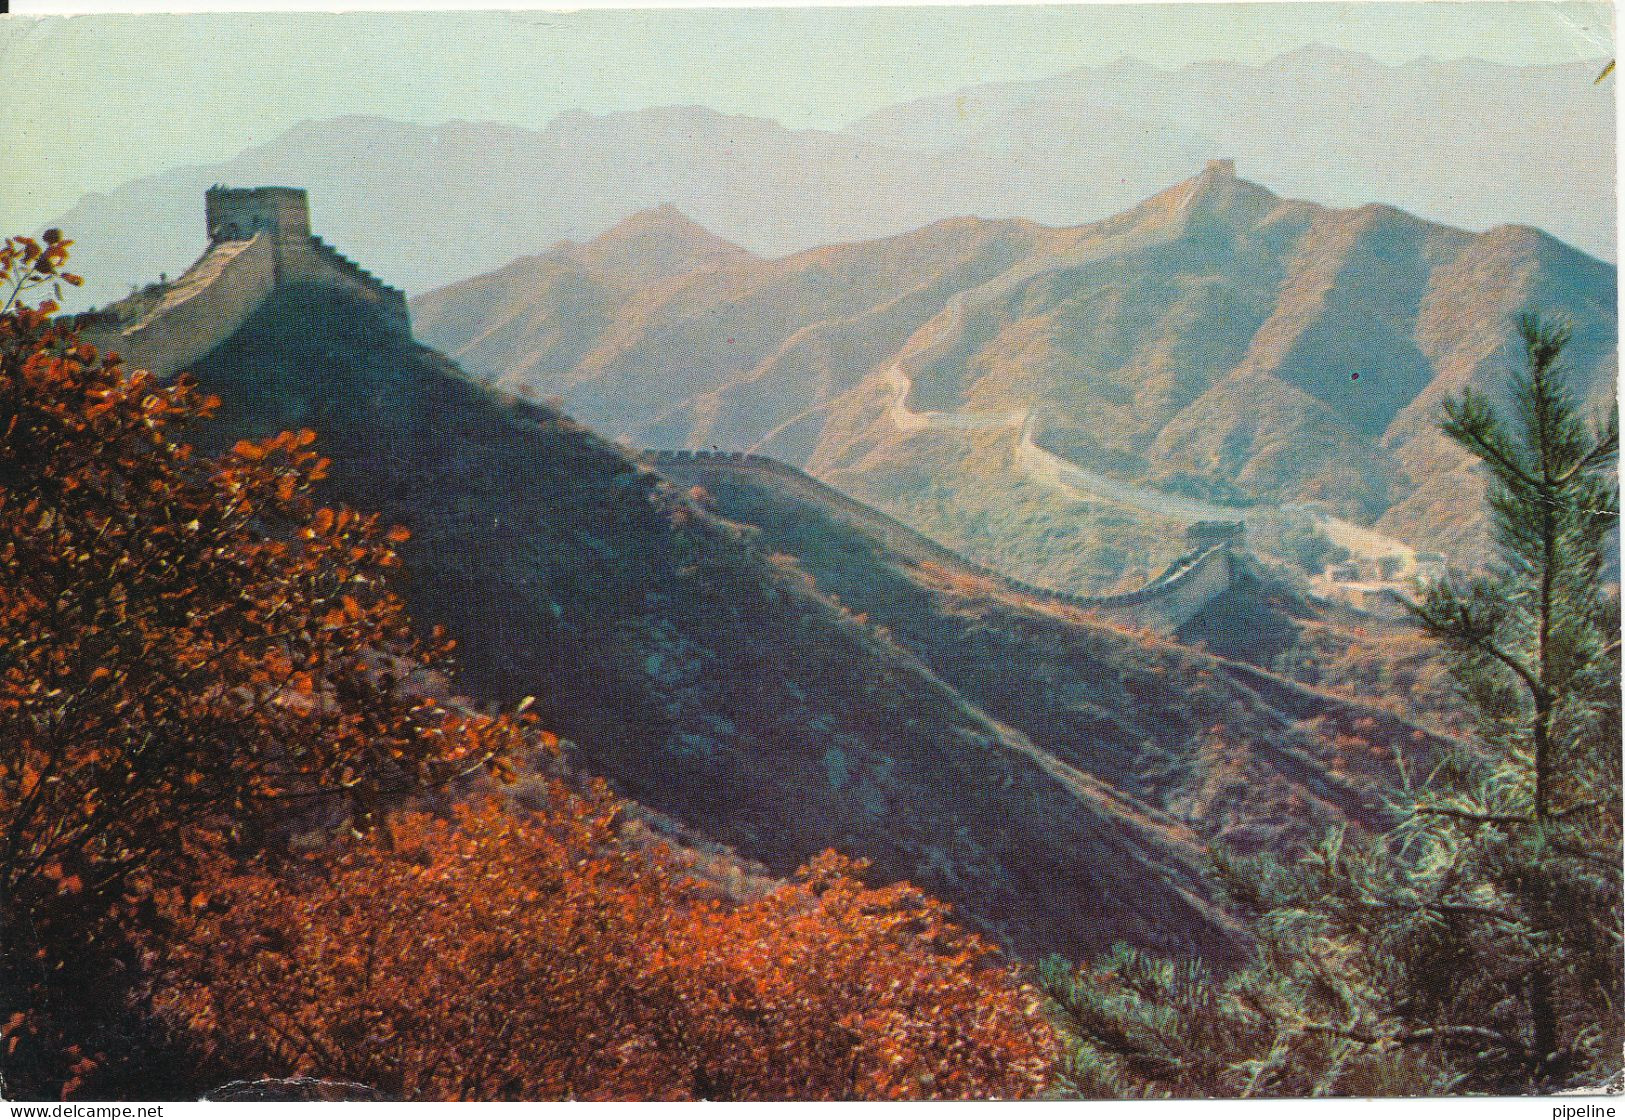 P. R. Of China Postcard The Great Wall Sent To Germany 24-8-1978 - Chine